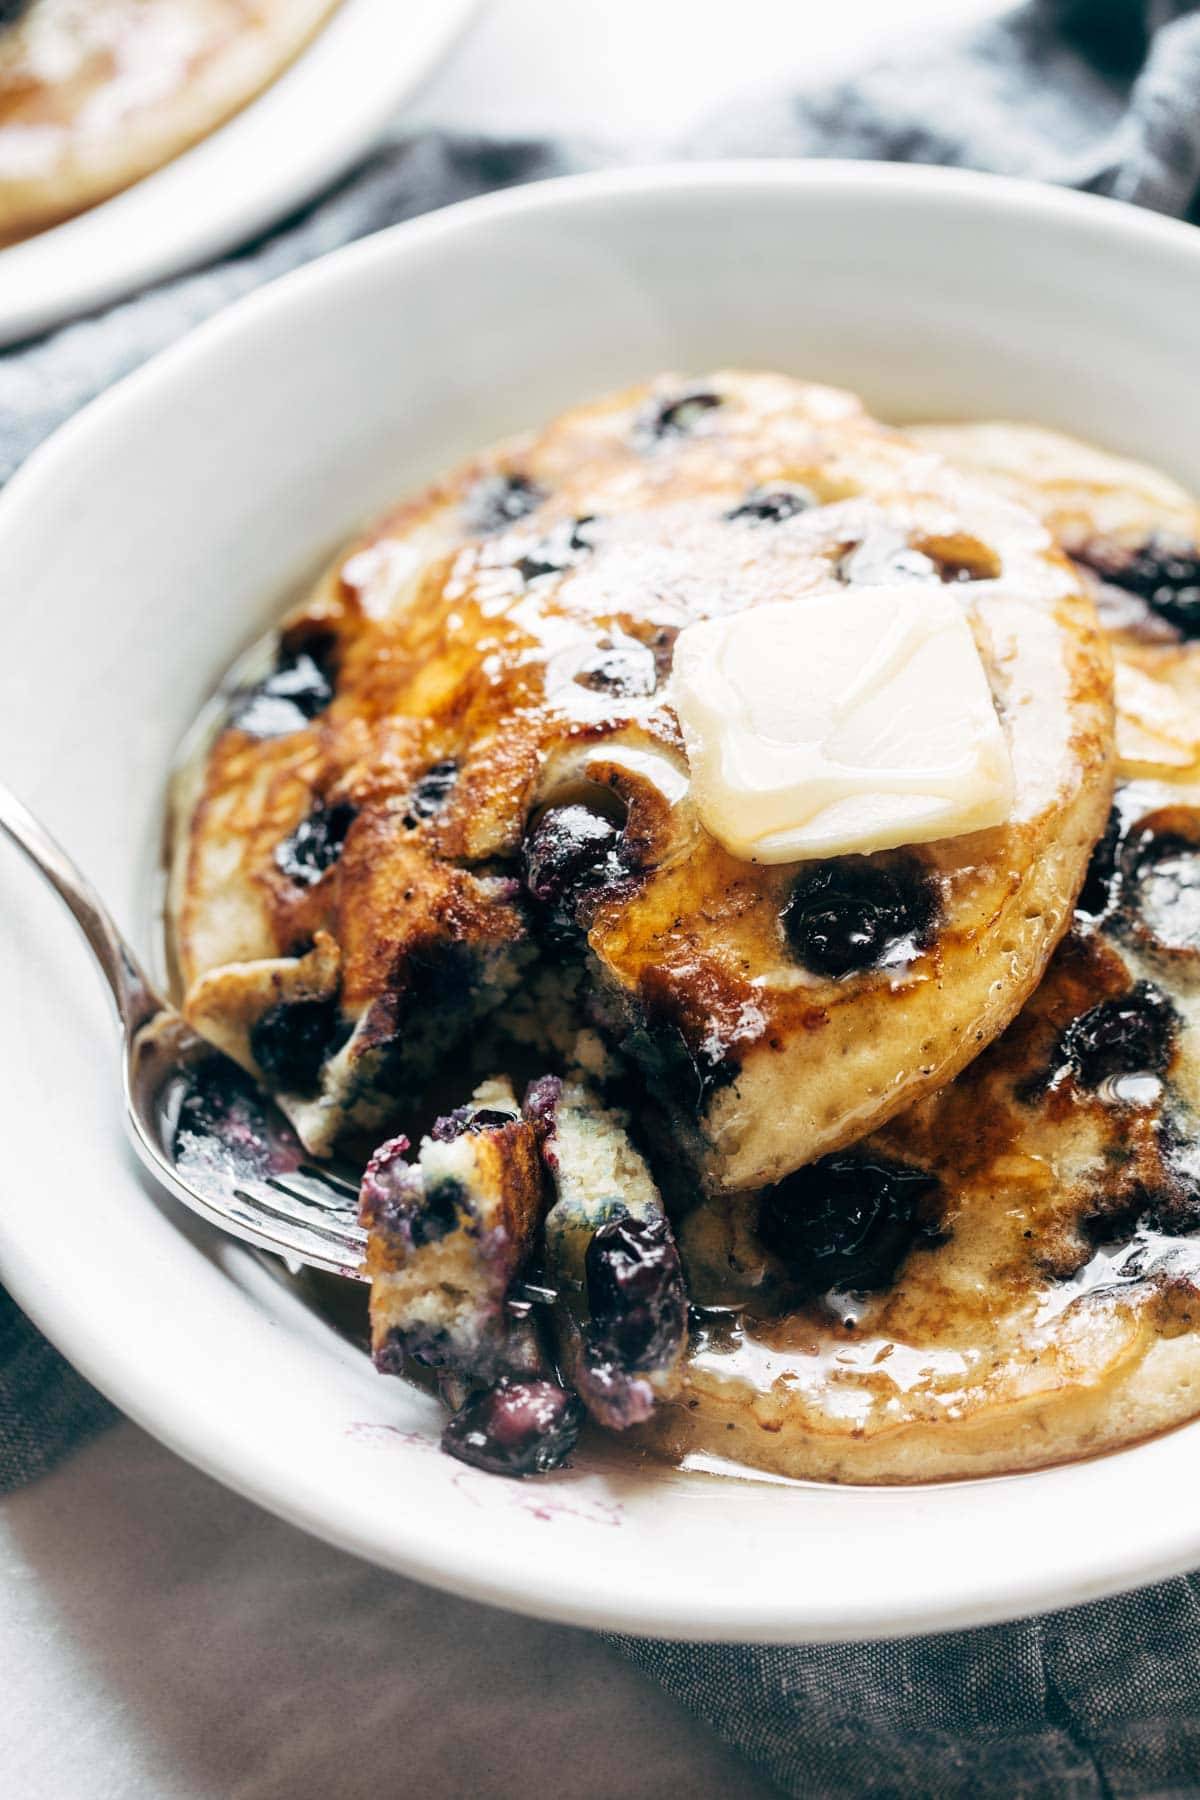 Blueberry pancakes on a plate with syrup and butter.